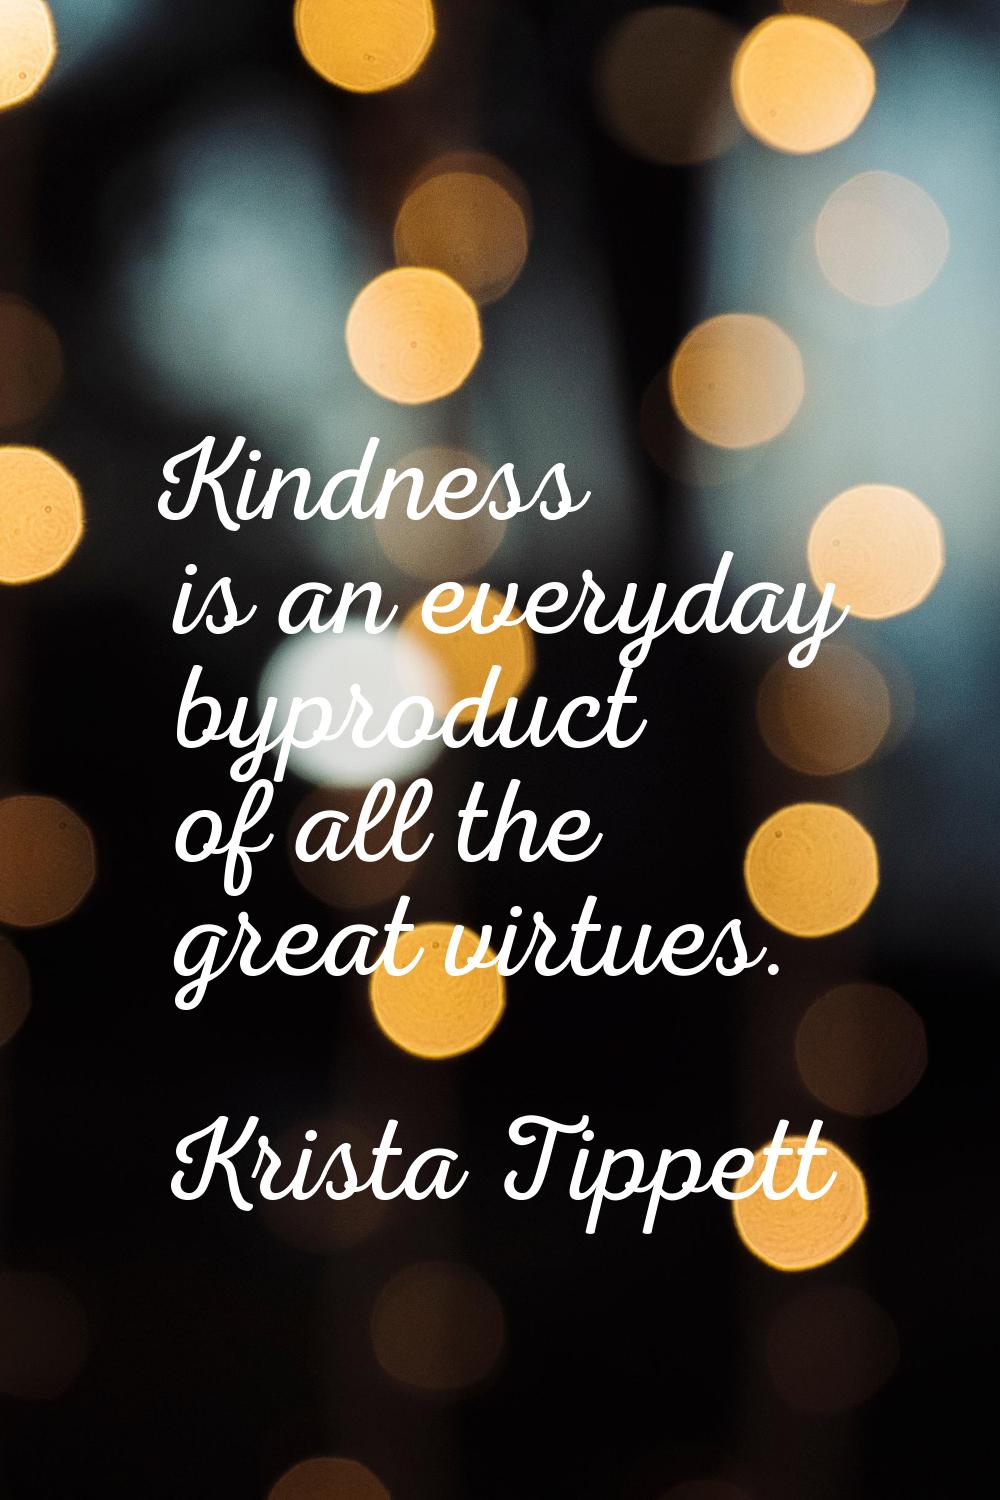 Kindness is an everyday byproduct of all the great virtues.